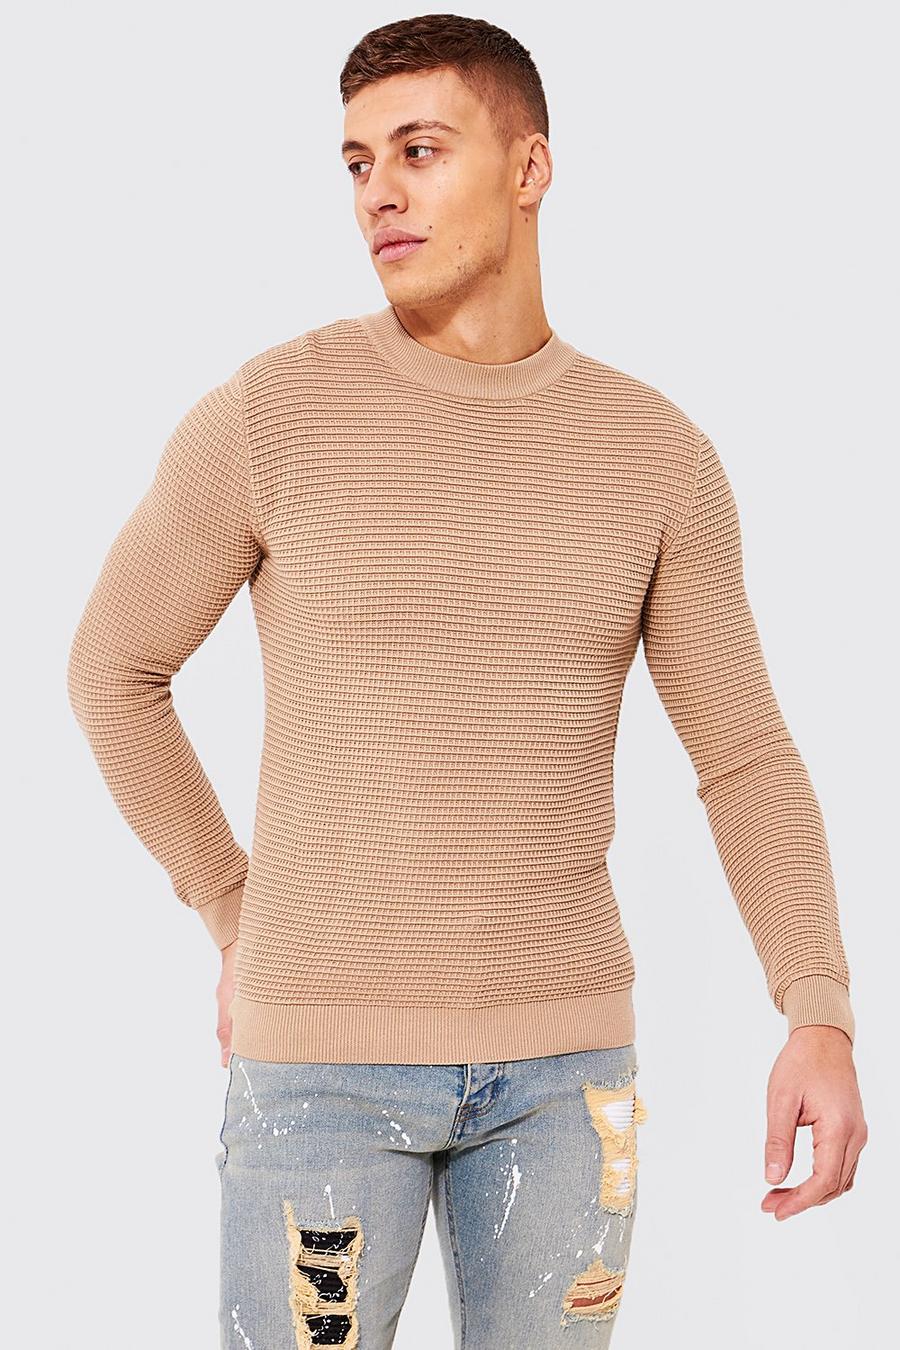 Muscle-Fit Pullover in Waffeloptik, Taupe beige